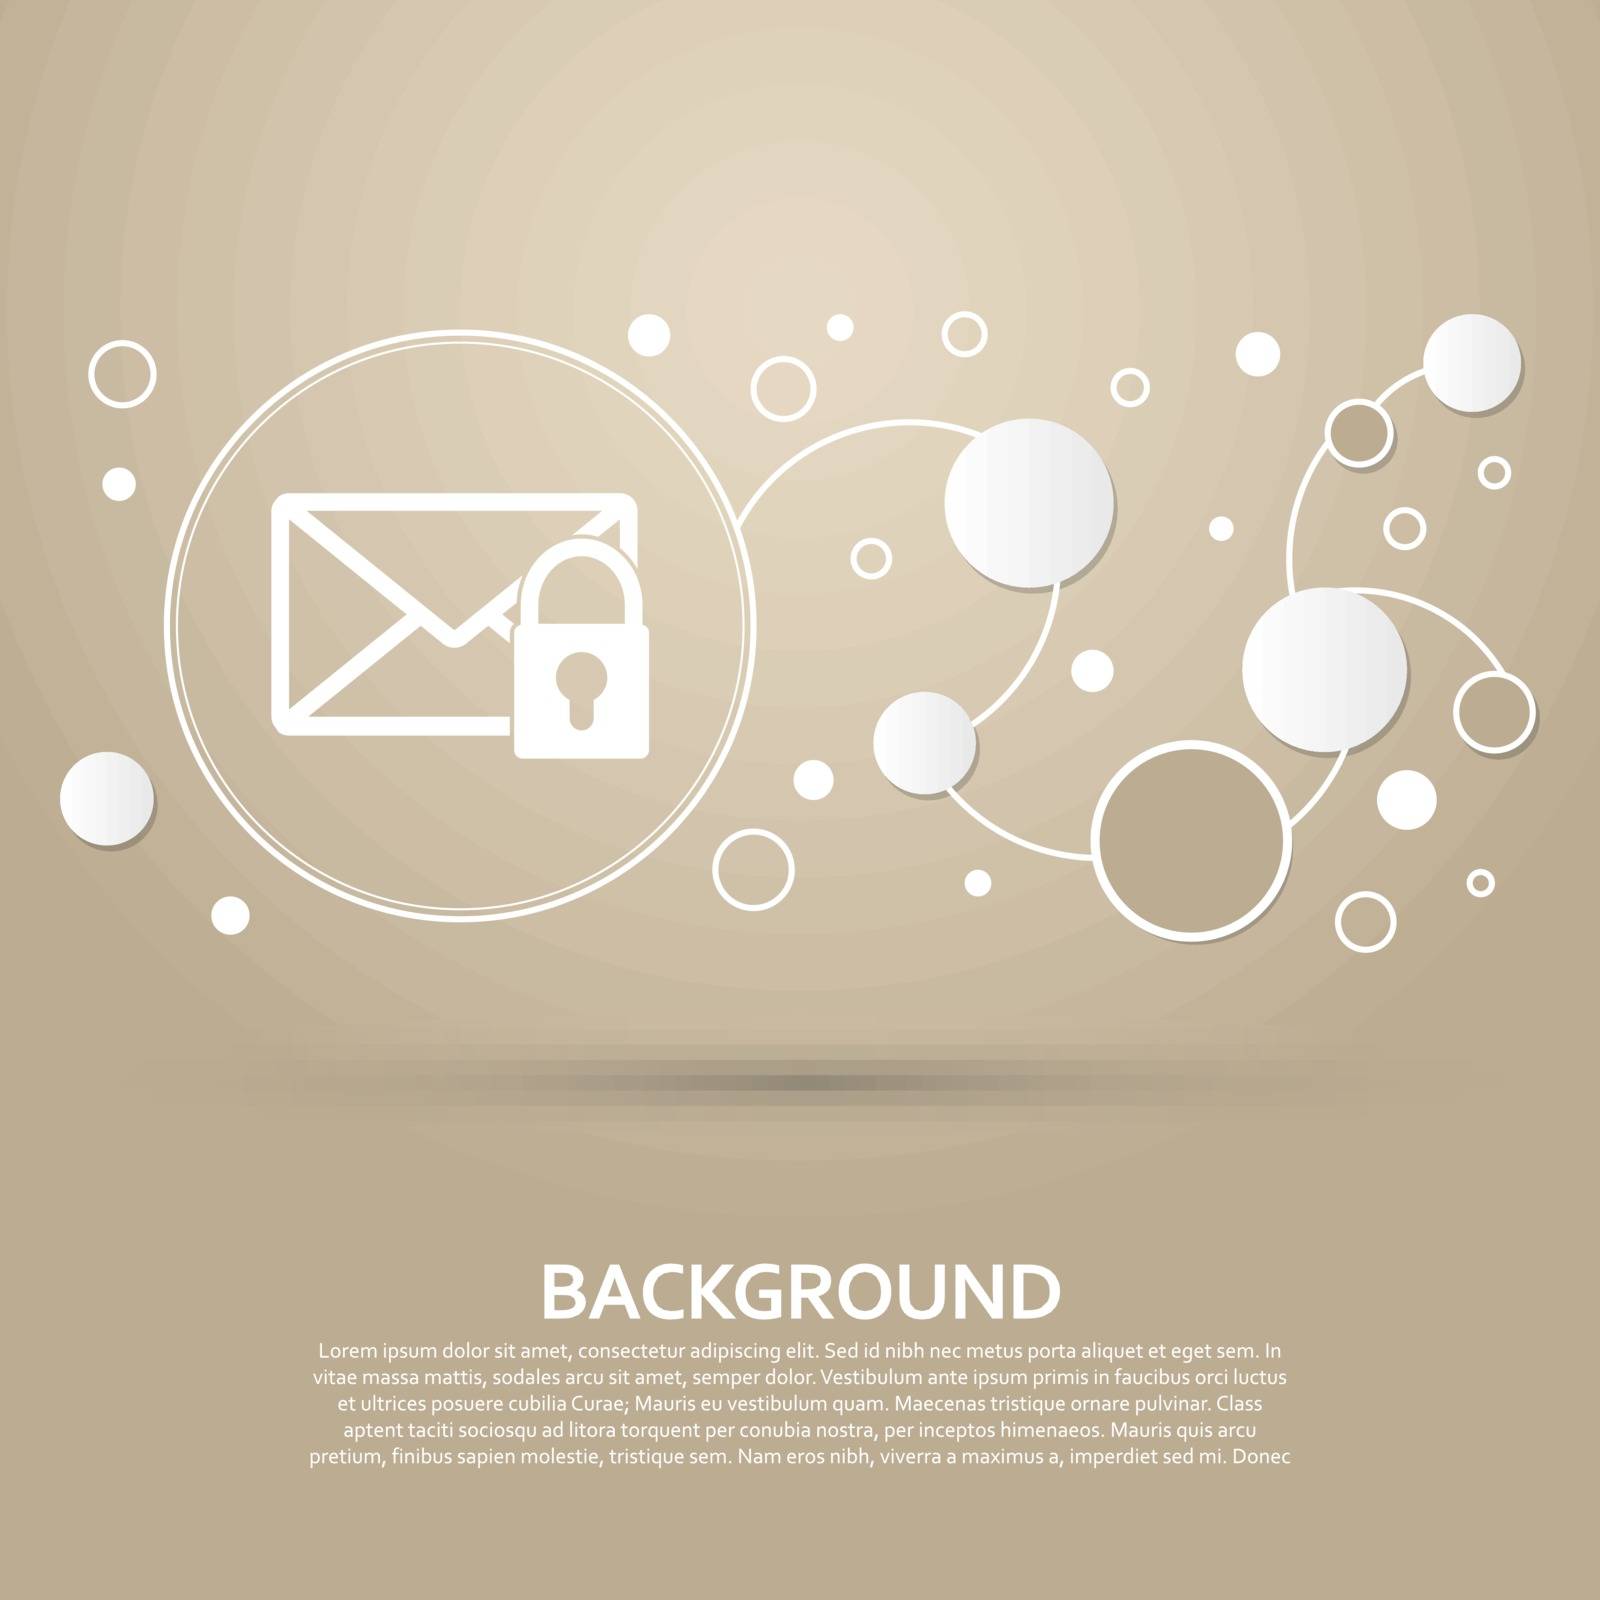 Secret mail icon on a brown background with elegant style and modern design infographic. Vector by Adamchuk